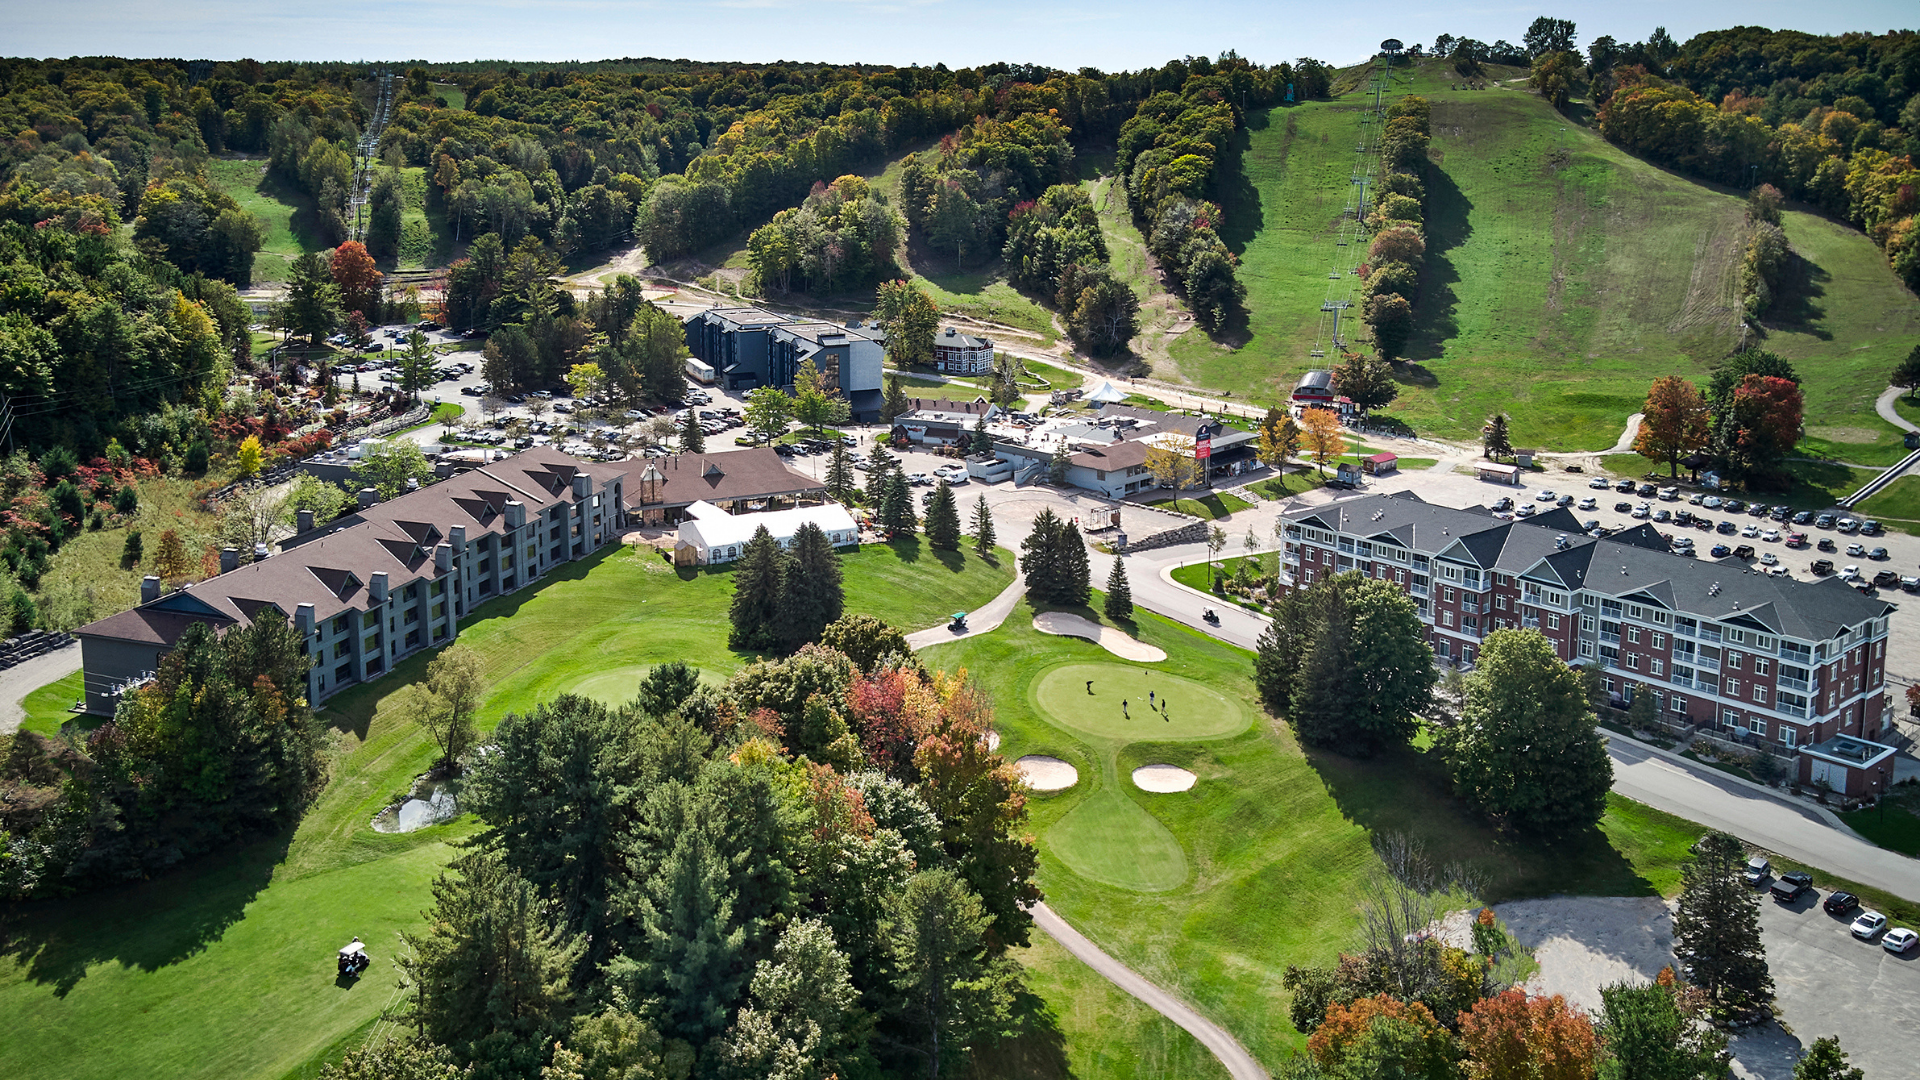 Aerial view over the grounds at Horseshoe Resort